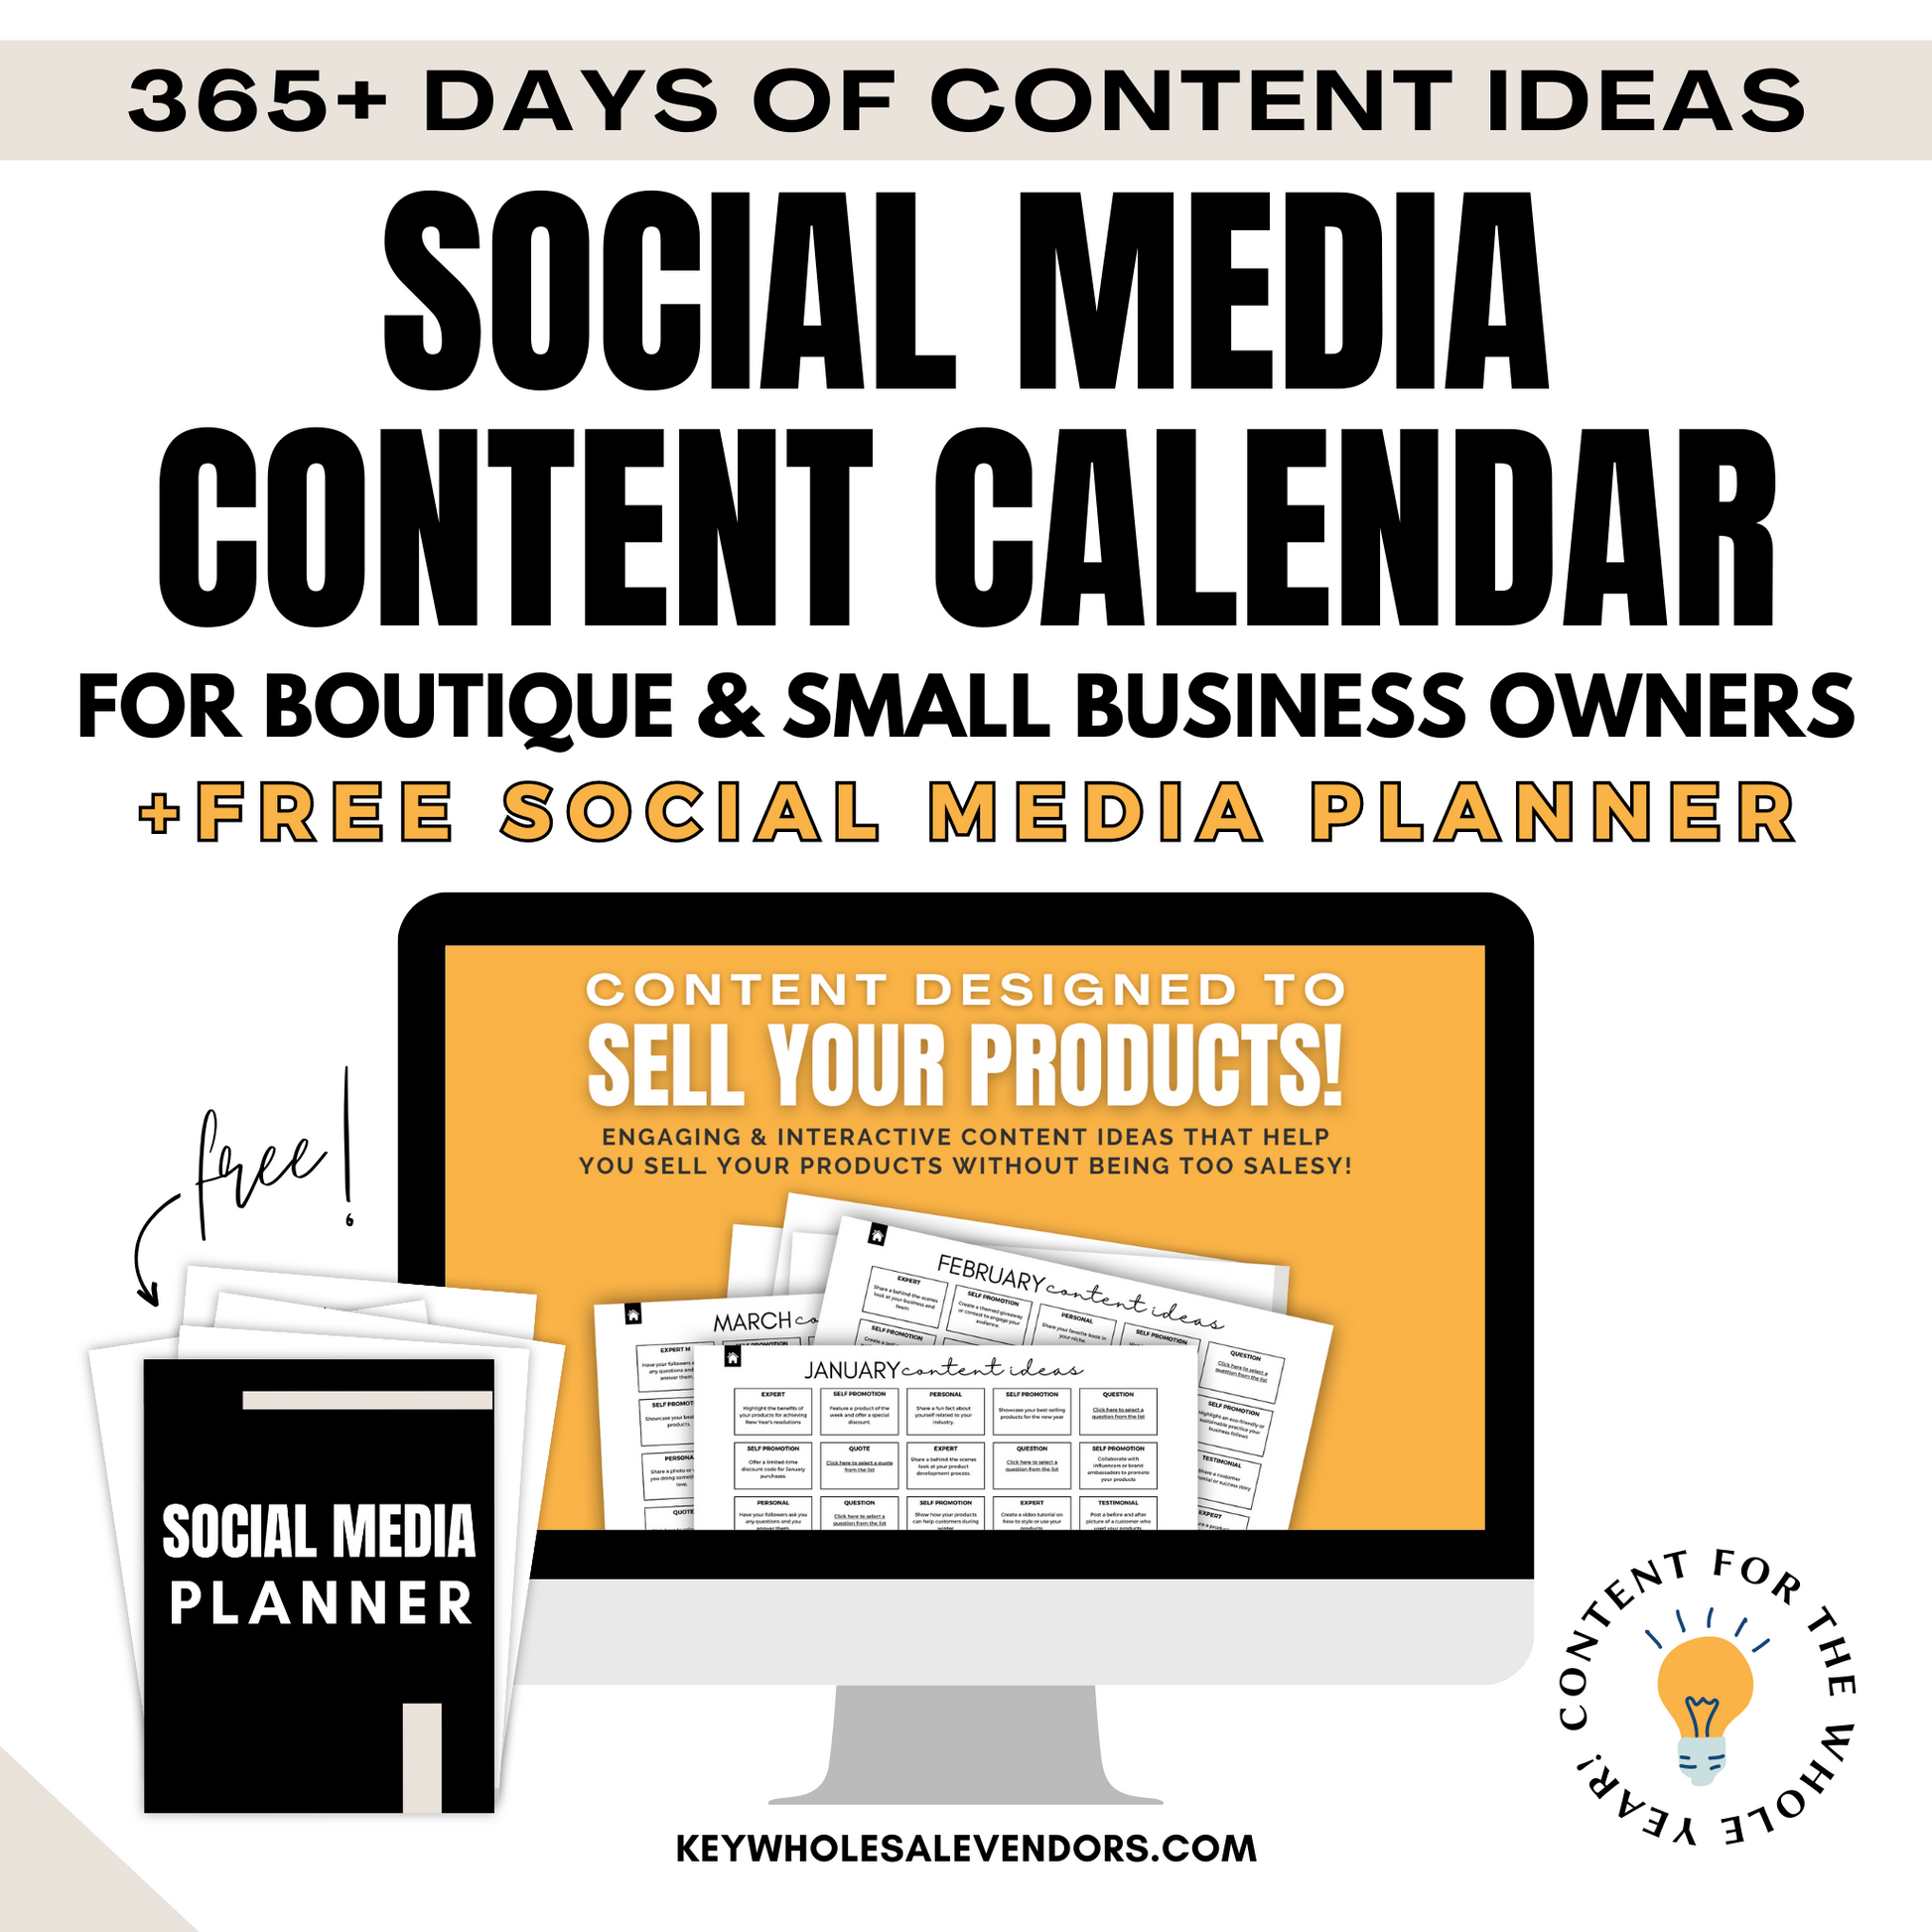 Social Media Content Ideas Calendar for Boutique & Small Business Owners